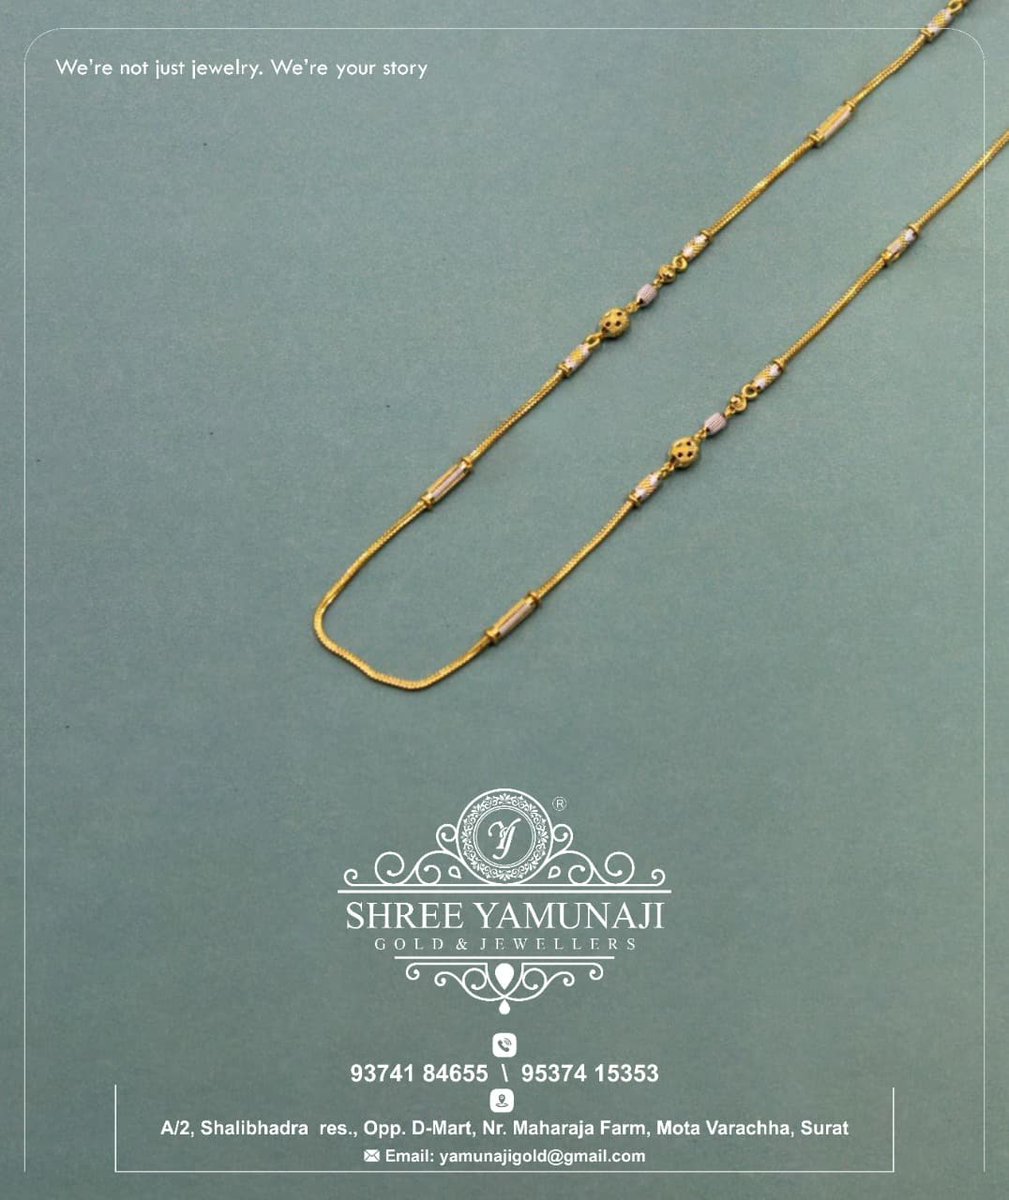 A depiction of grace and elegance, this Chain Necklace looks splendid in the finest jewels

To explore the collection, DM us or WhatsApp us on +91 9374184655

#yamunajijewellers #yamora #necklace #necklacesofinstagram #necklaceset #suratjewellery #diamondnecklace #instanecklace